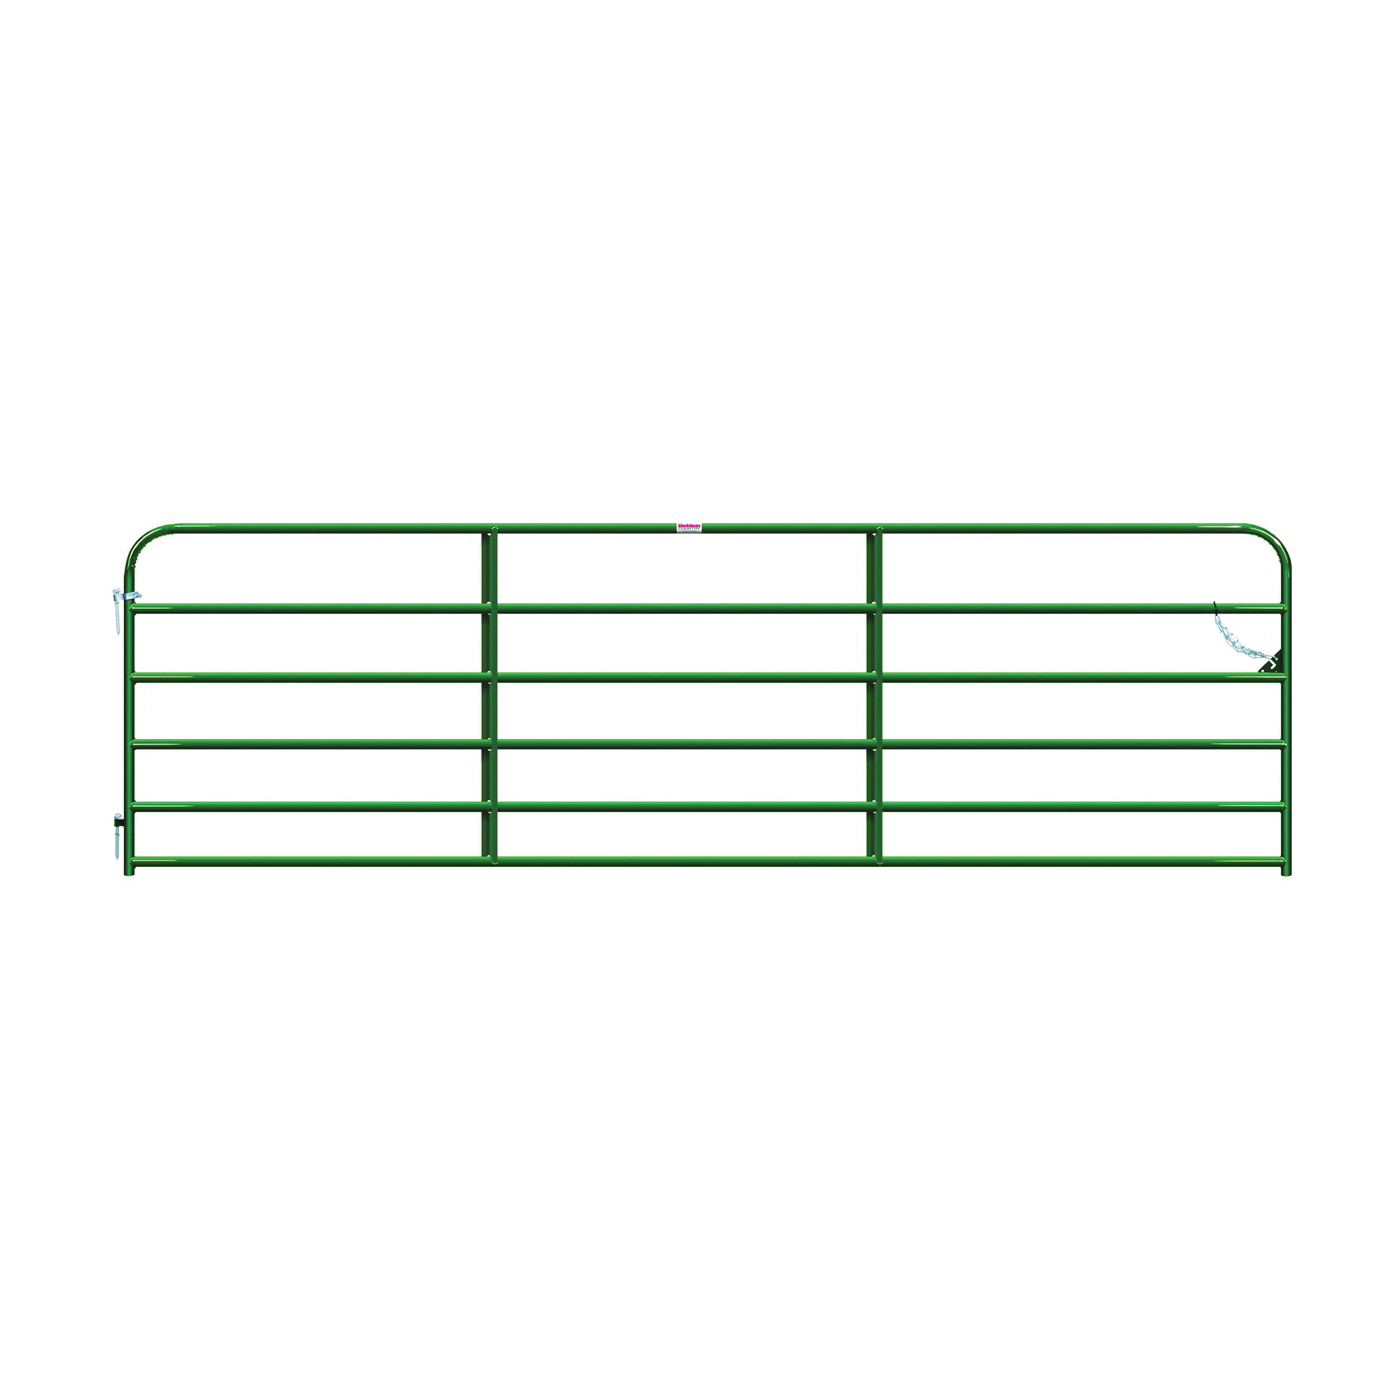 Behlen Country 40130142 Utility Gate, 168 in W Gate, 50 in H Gate, 20 ga Frame Tube/Channel, Green